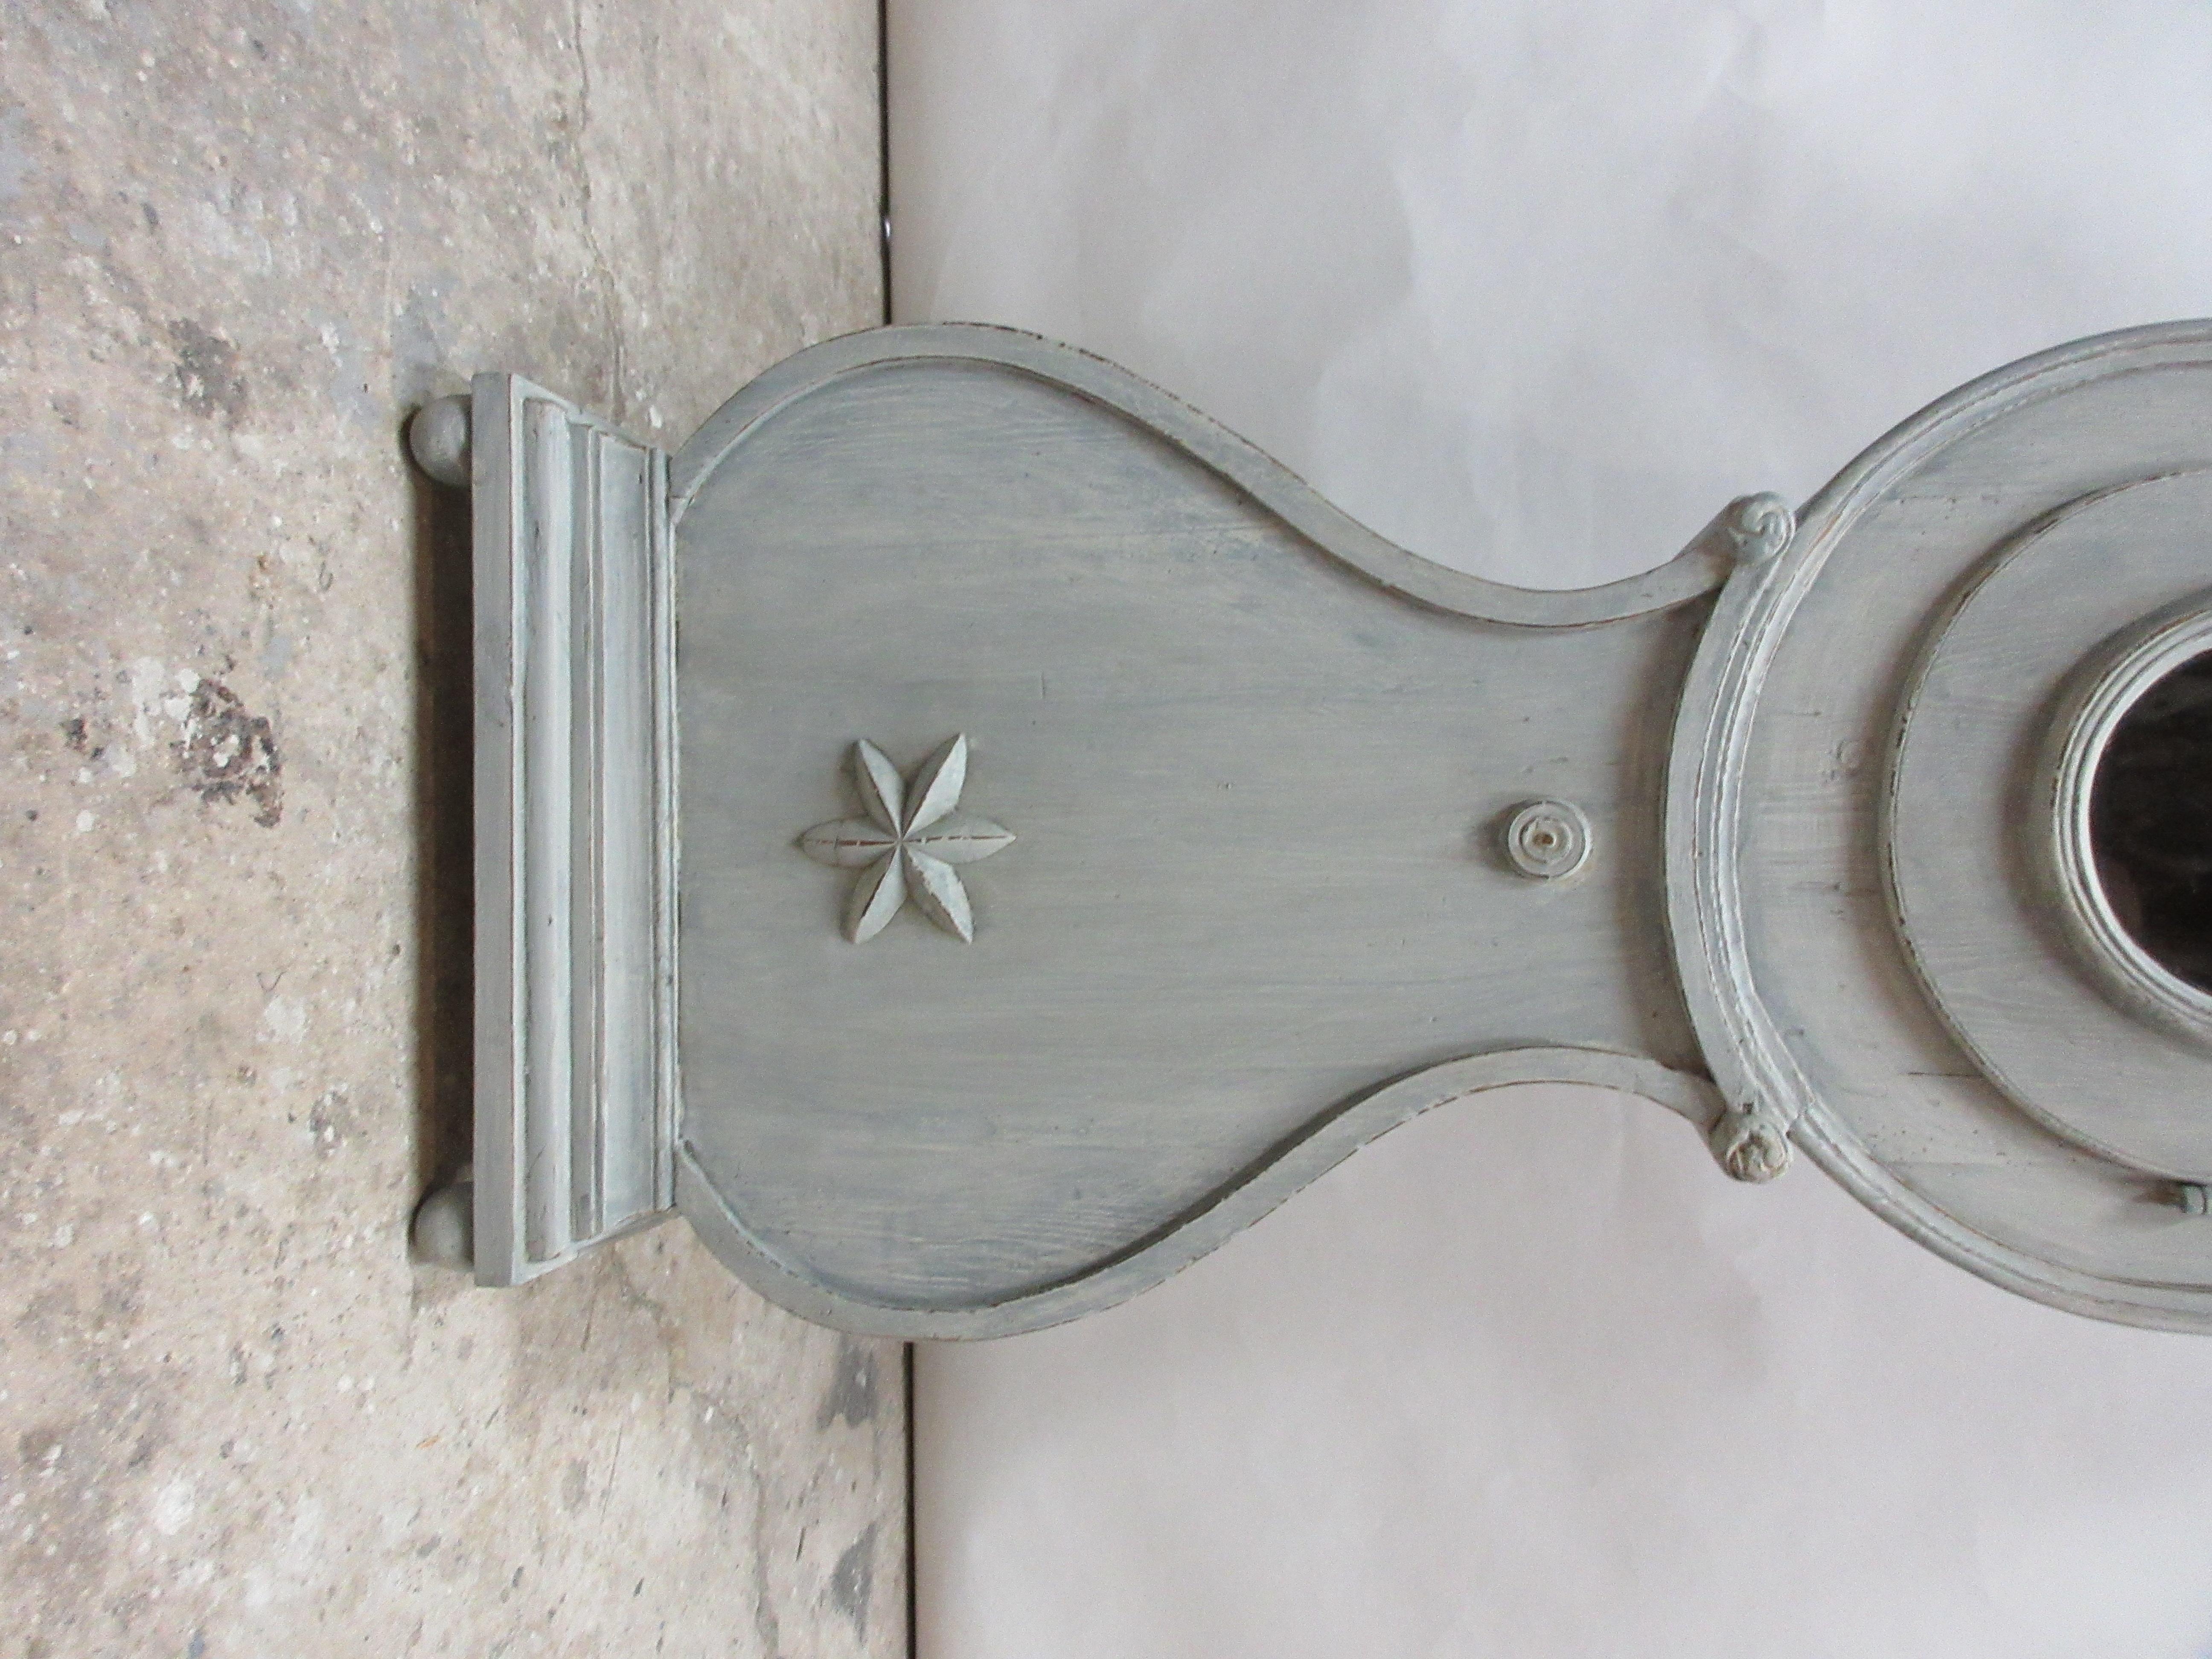 This is a Long Case Swedish Mora clock, its been restored and repainted with 